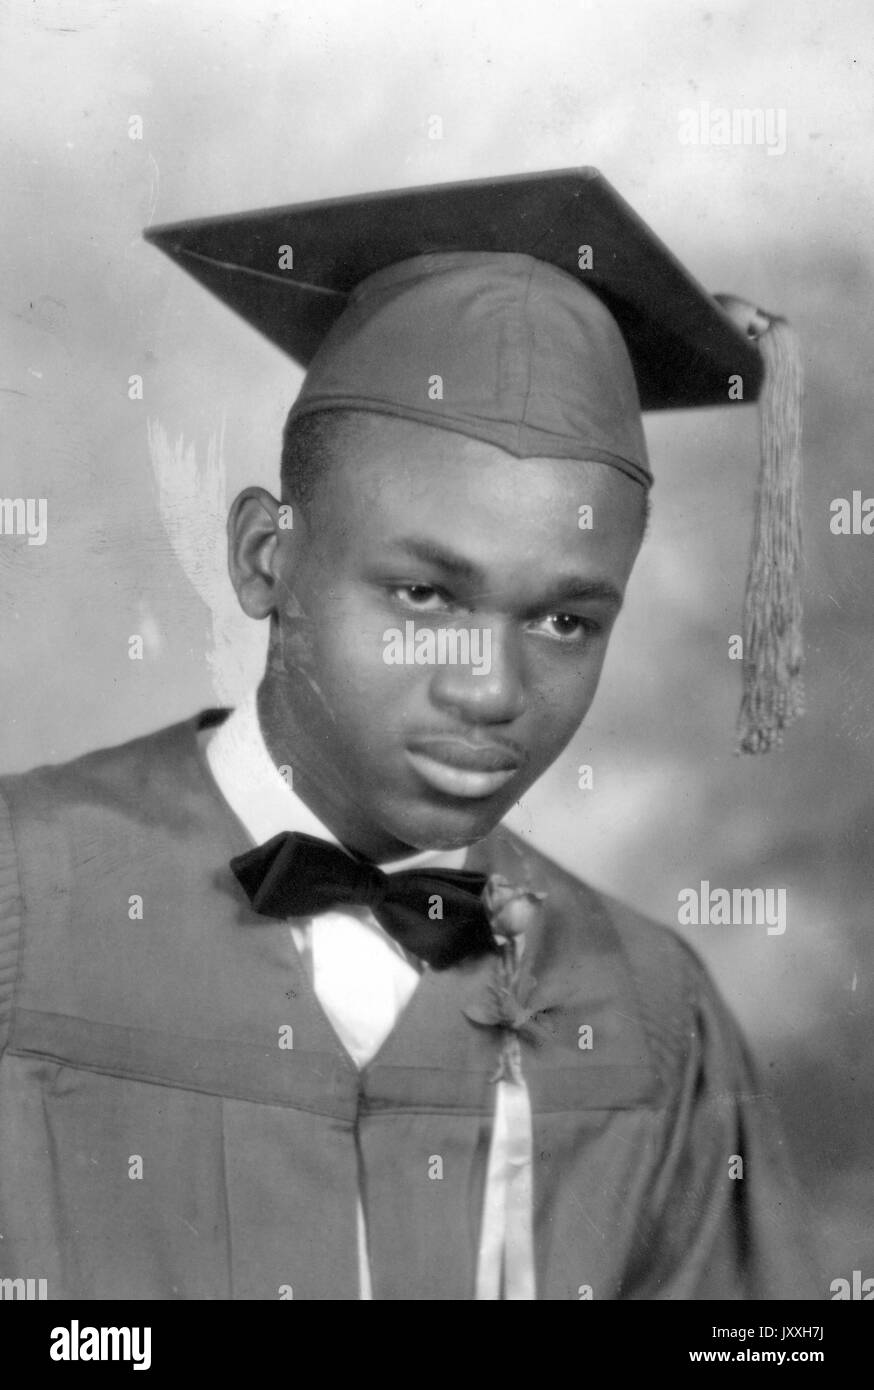 Headshot of young African American man, wearing graduation gown and hat, bow tie, tassel, floral boutonniere and light shirt, neutral expression, 1930. Stock Photo